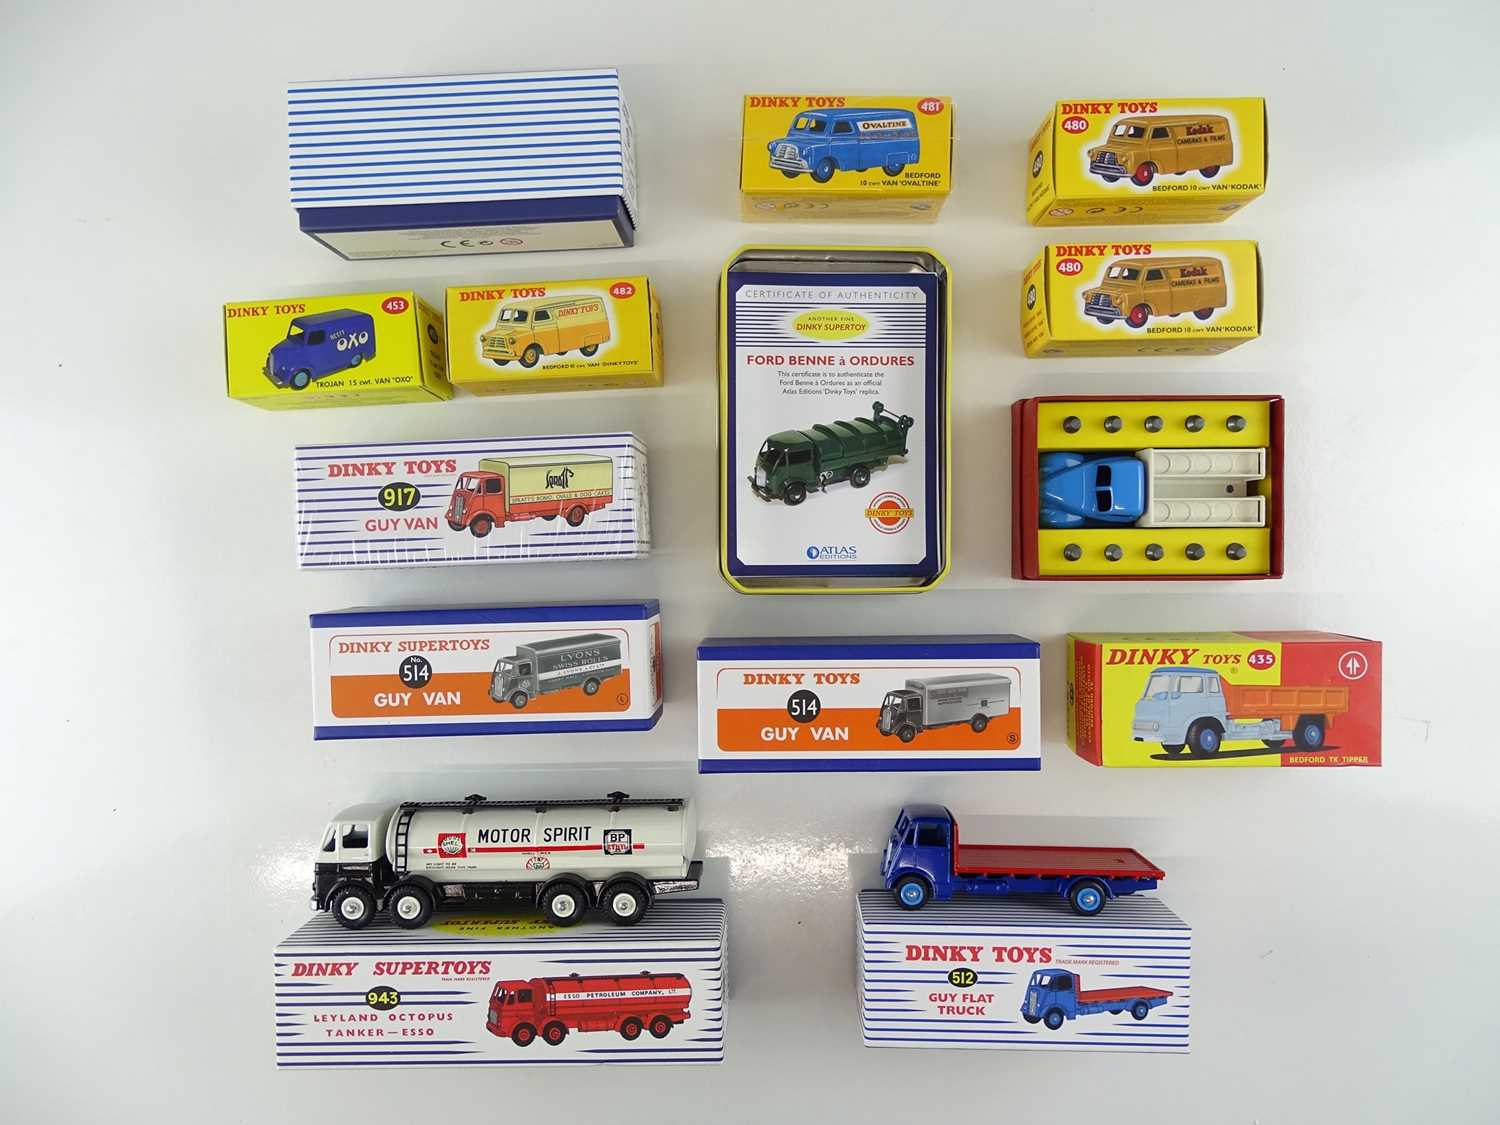 A group of ATLAS DINKY lorries and vans from the British range including a Code 3 example - VG in